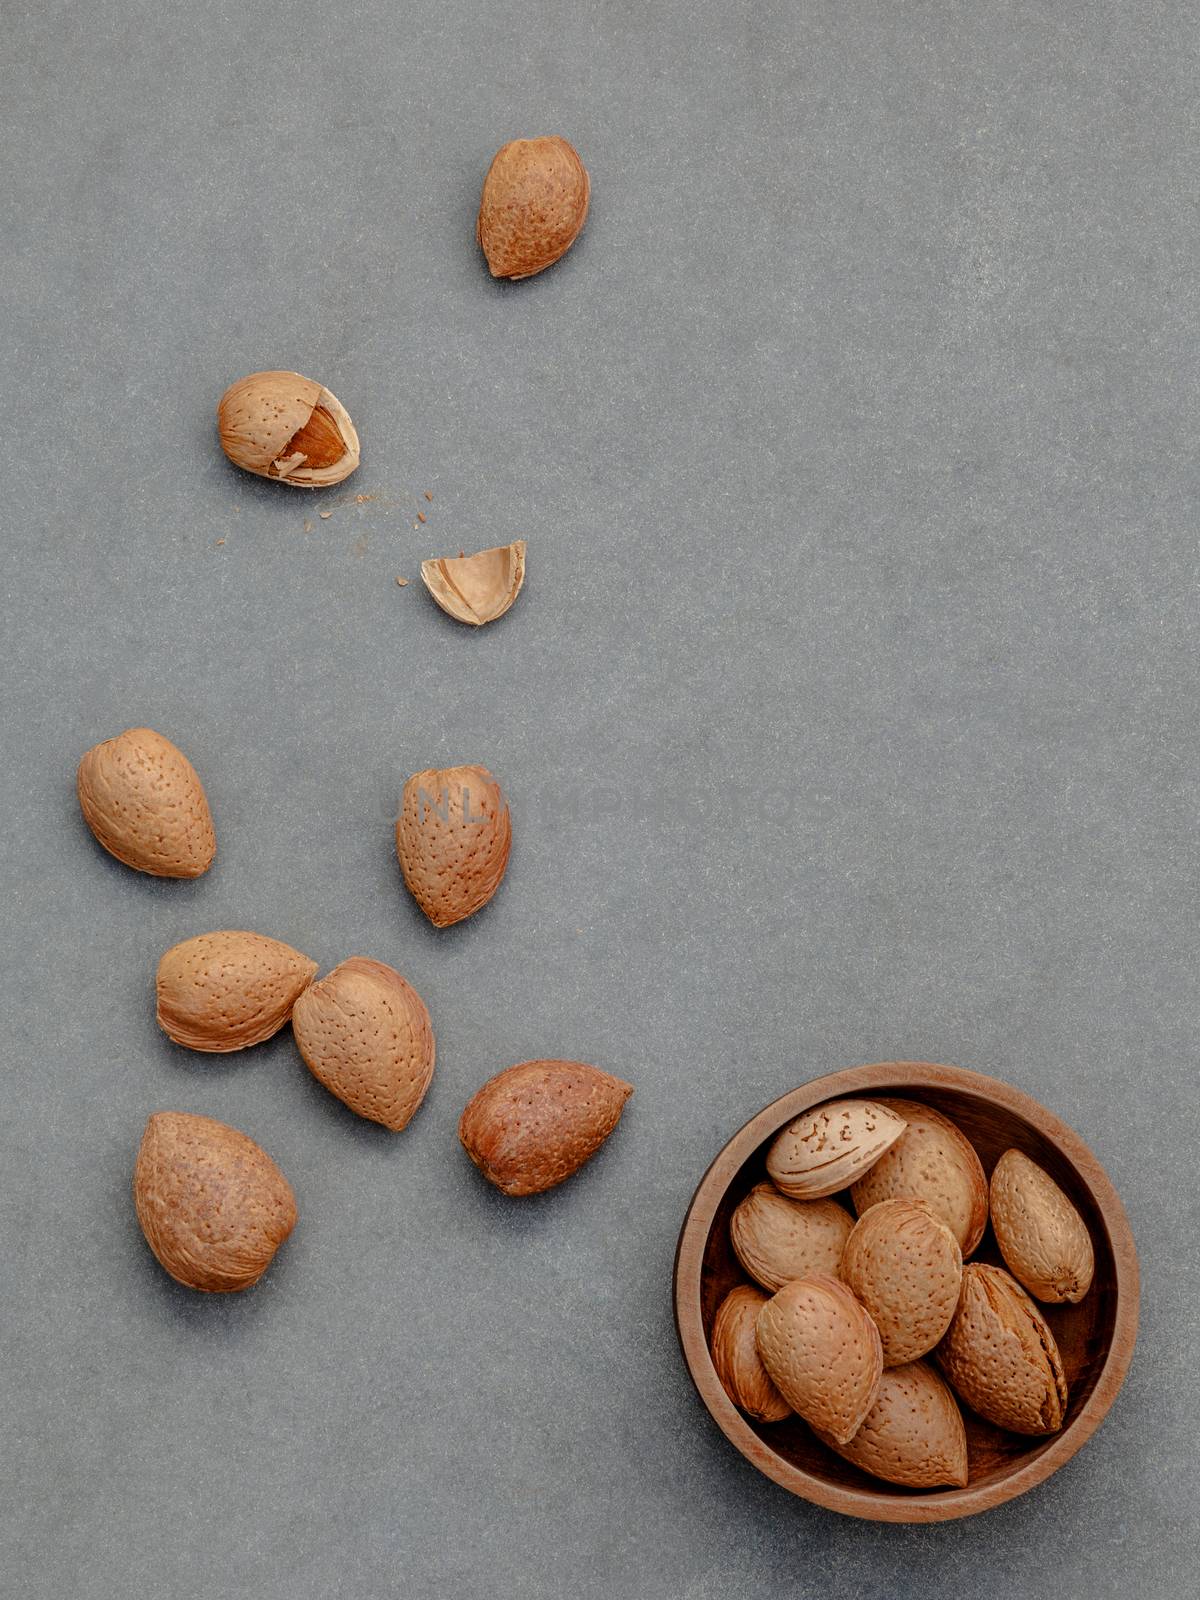 Almonds kernels and whole almonds on concrete background. Whole and chopped almond on concrete background. 